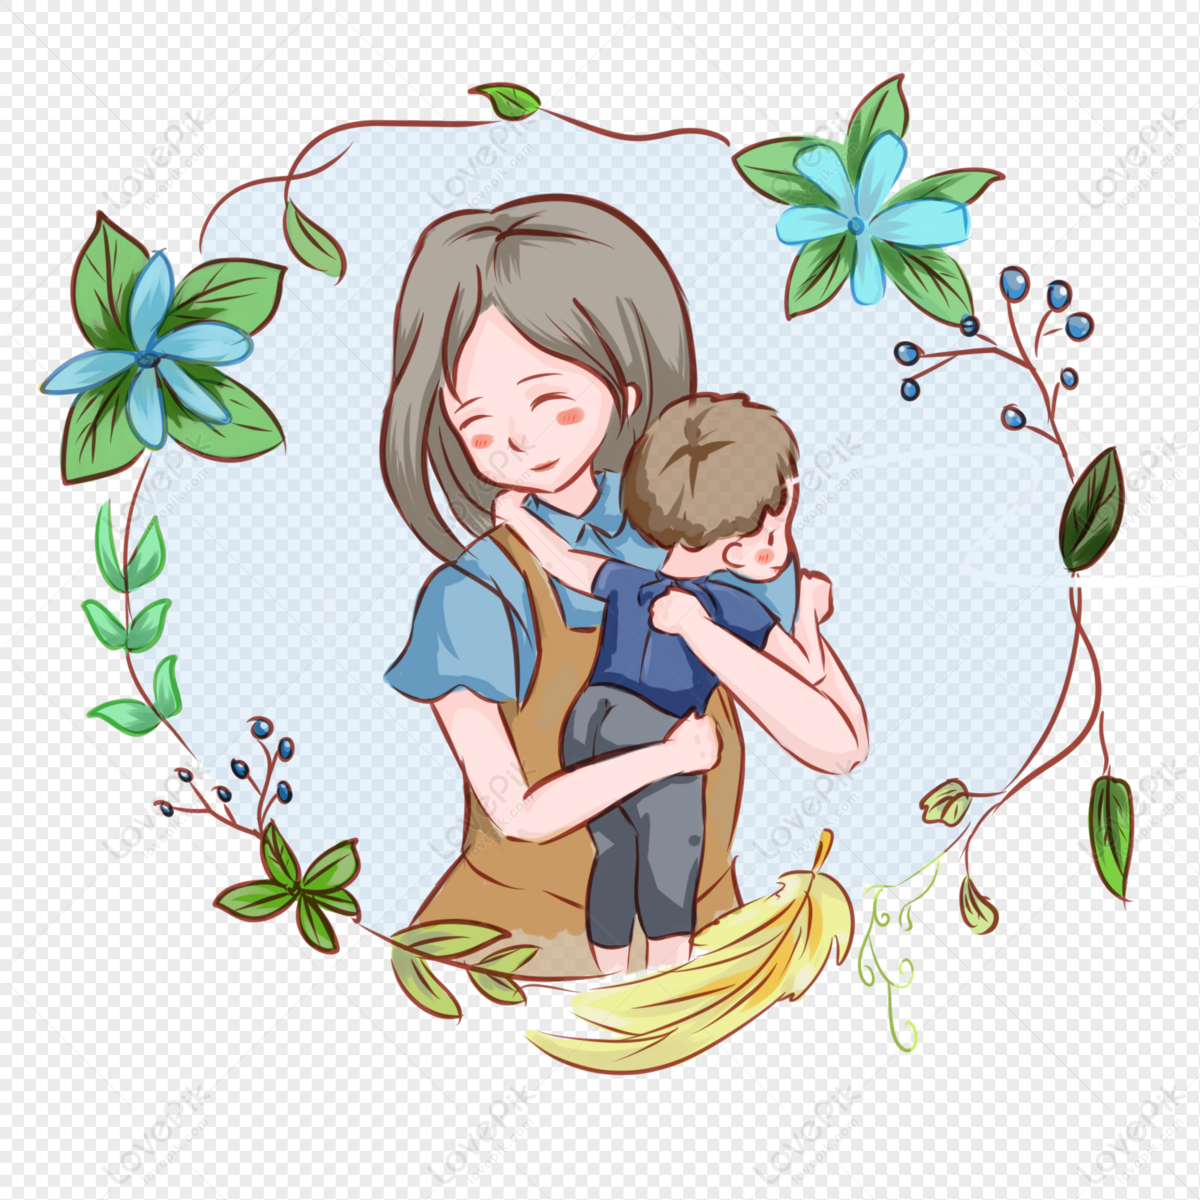 Mother With Baby Free PNG And Clipart Image For Free Download - Lovepik |  401136239